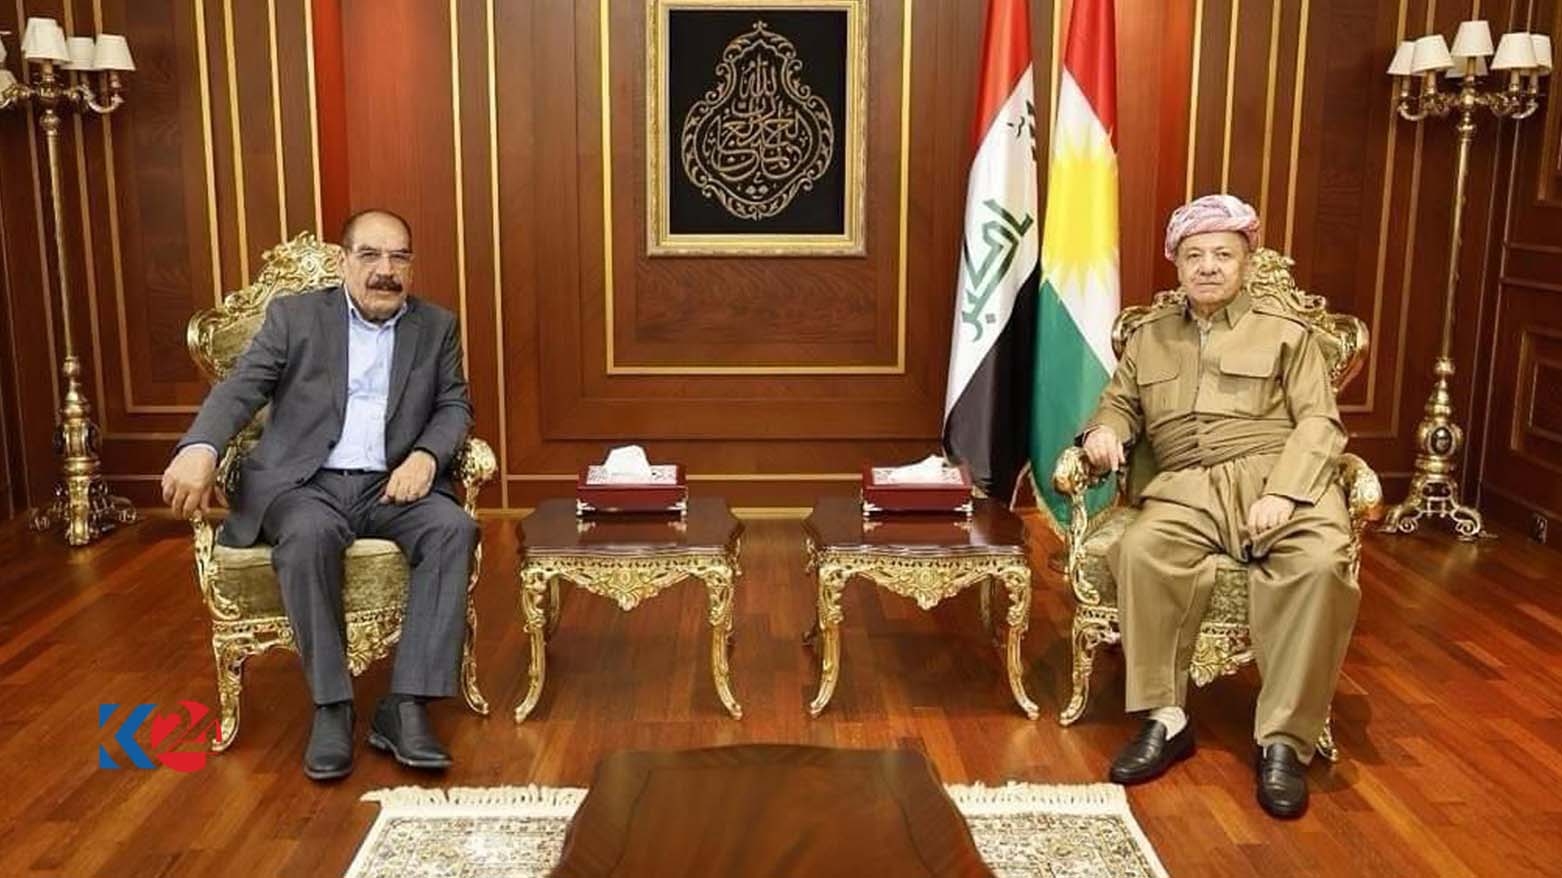 President Barzani Reaffirms Support for Sinjar and Urges Implementation of Agreement